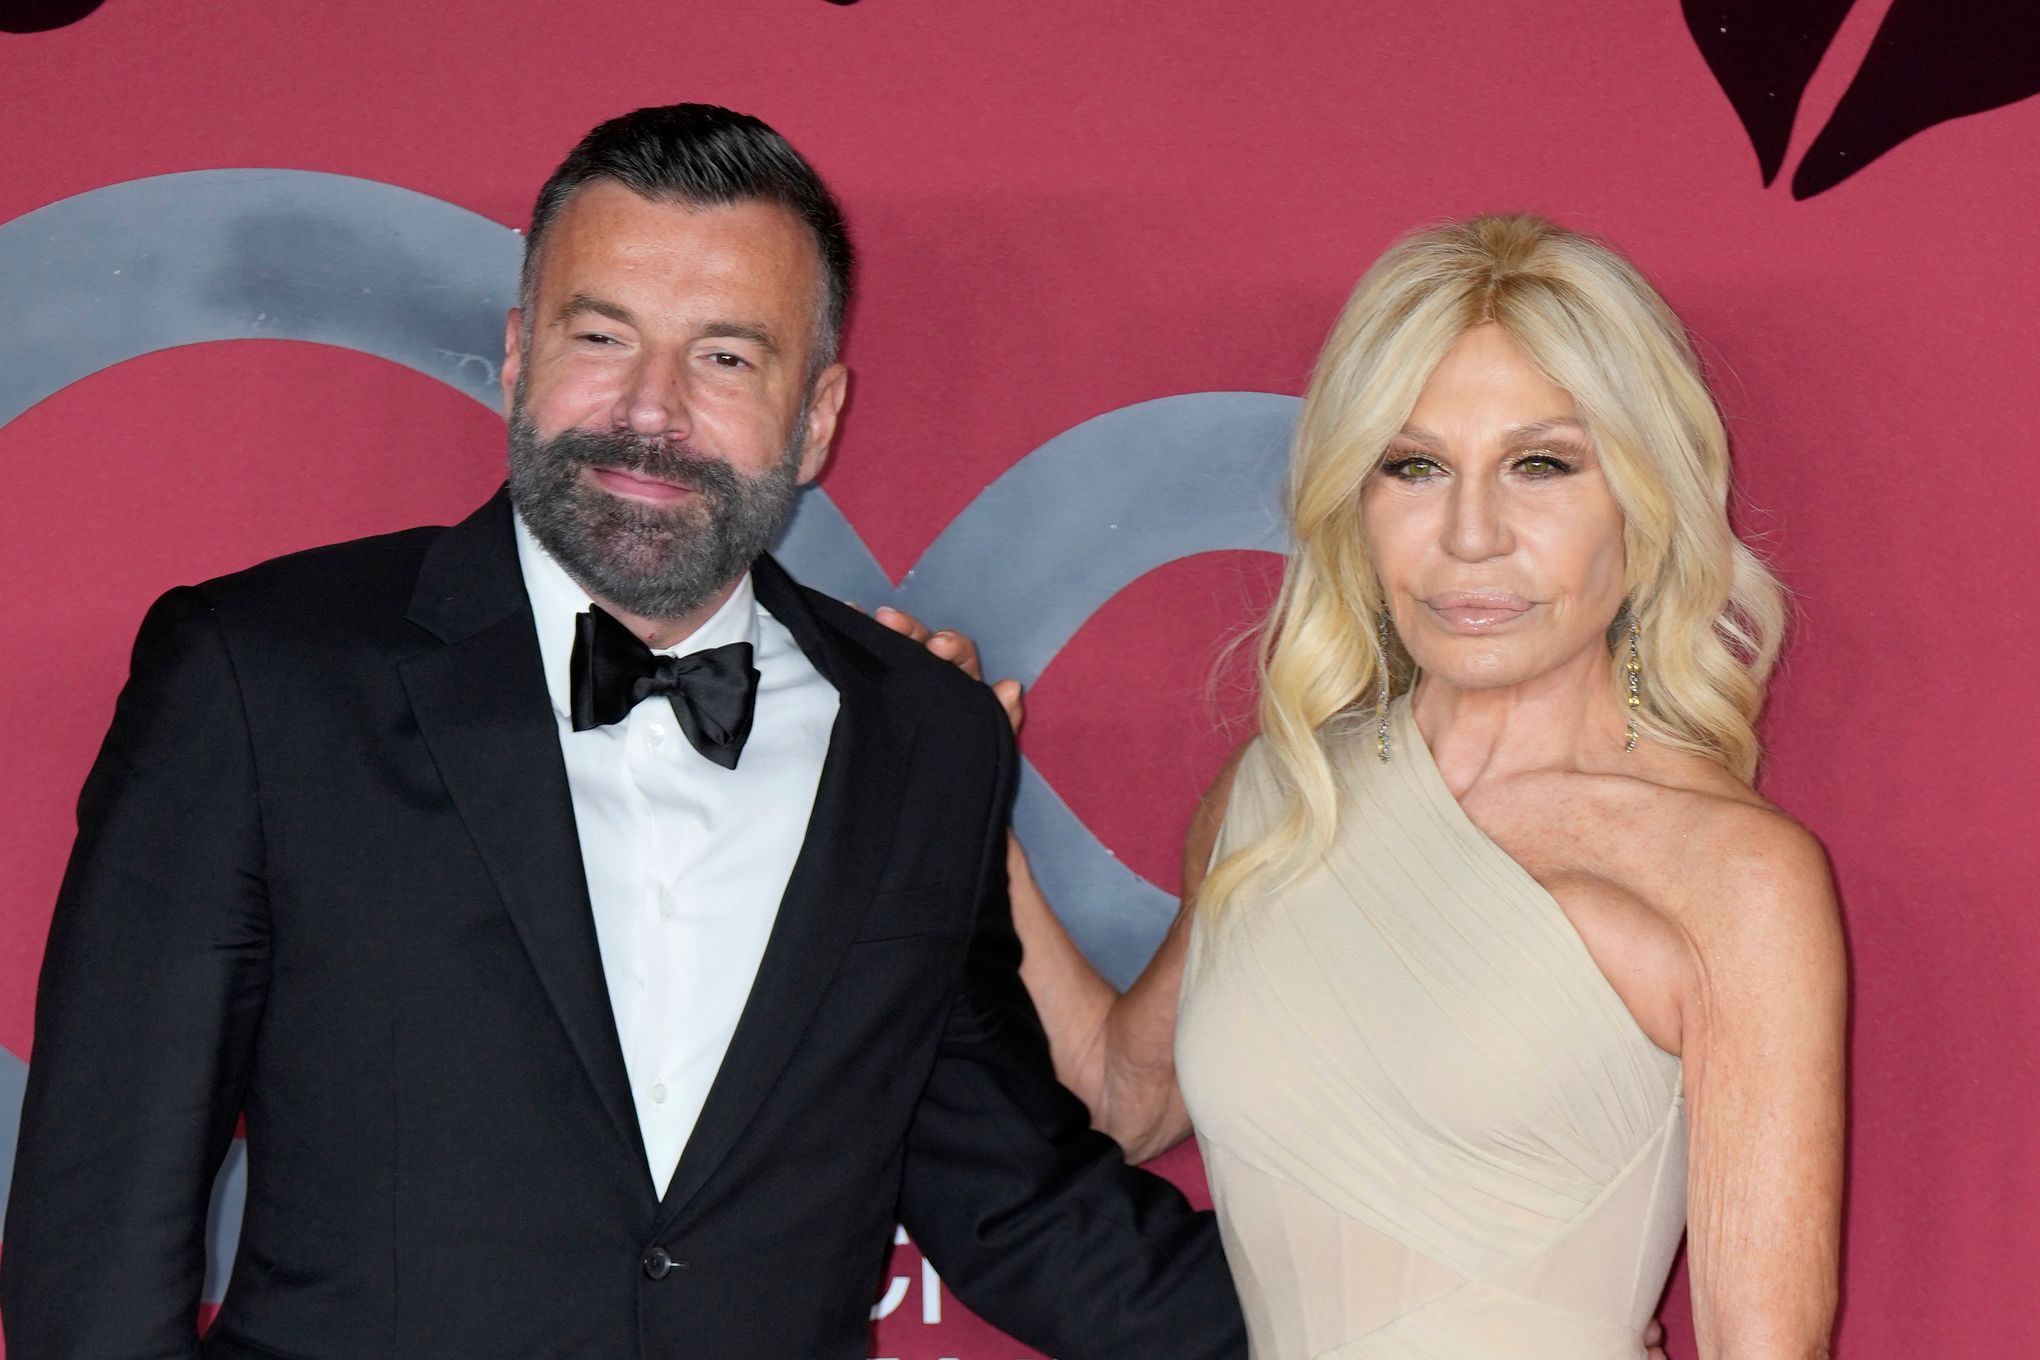 Donatella Versace Perfectly Calls Out Italy's Anti-LGBTQ+ Laws